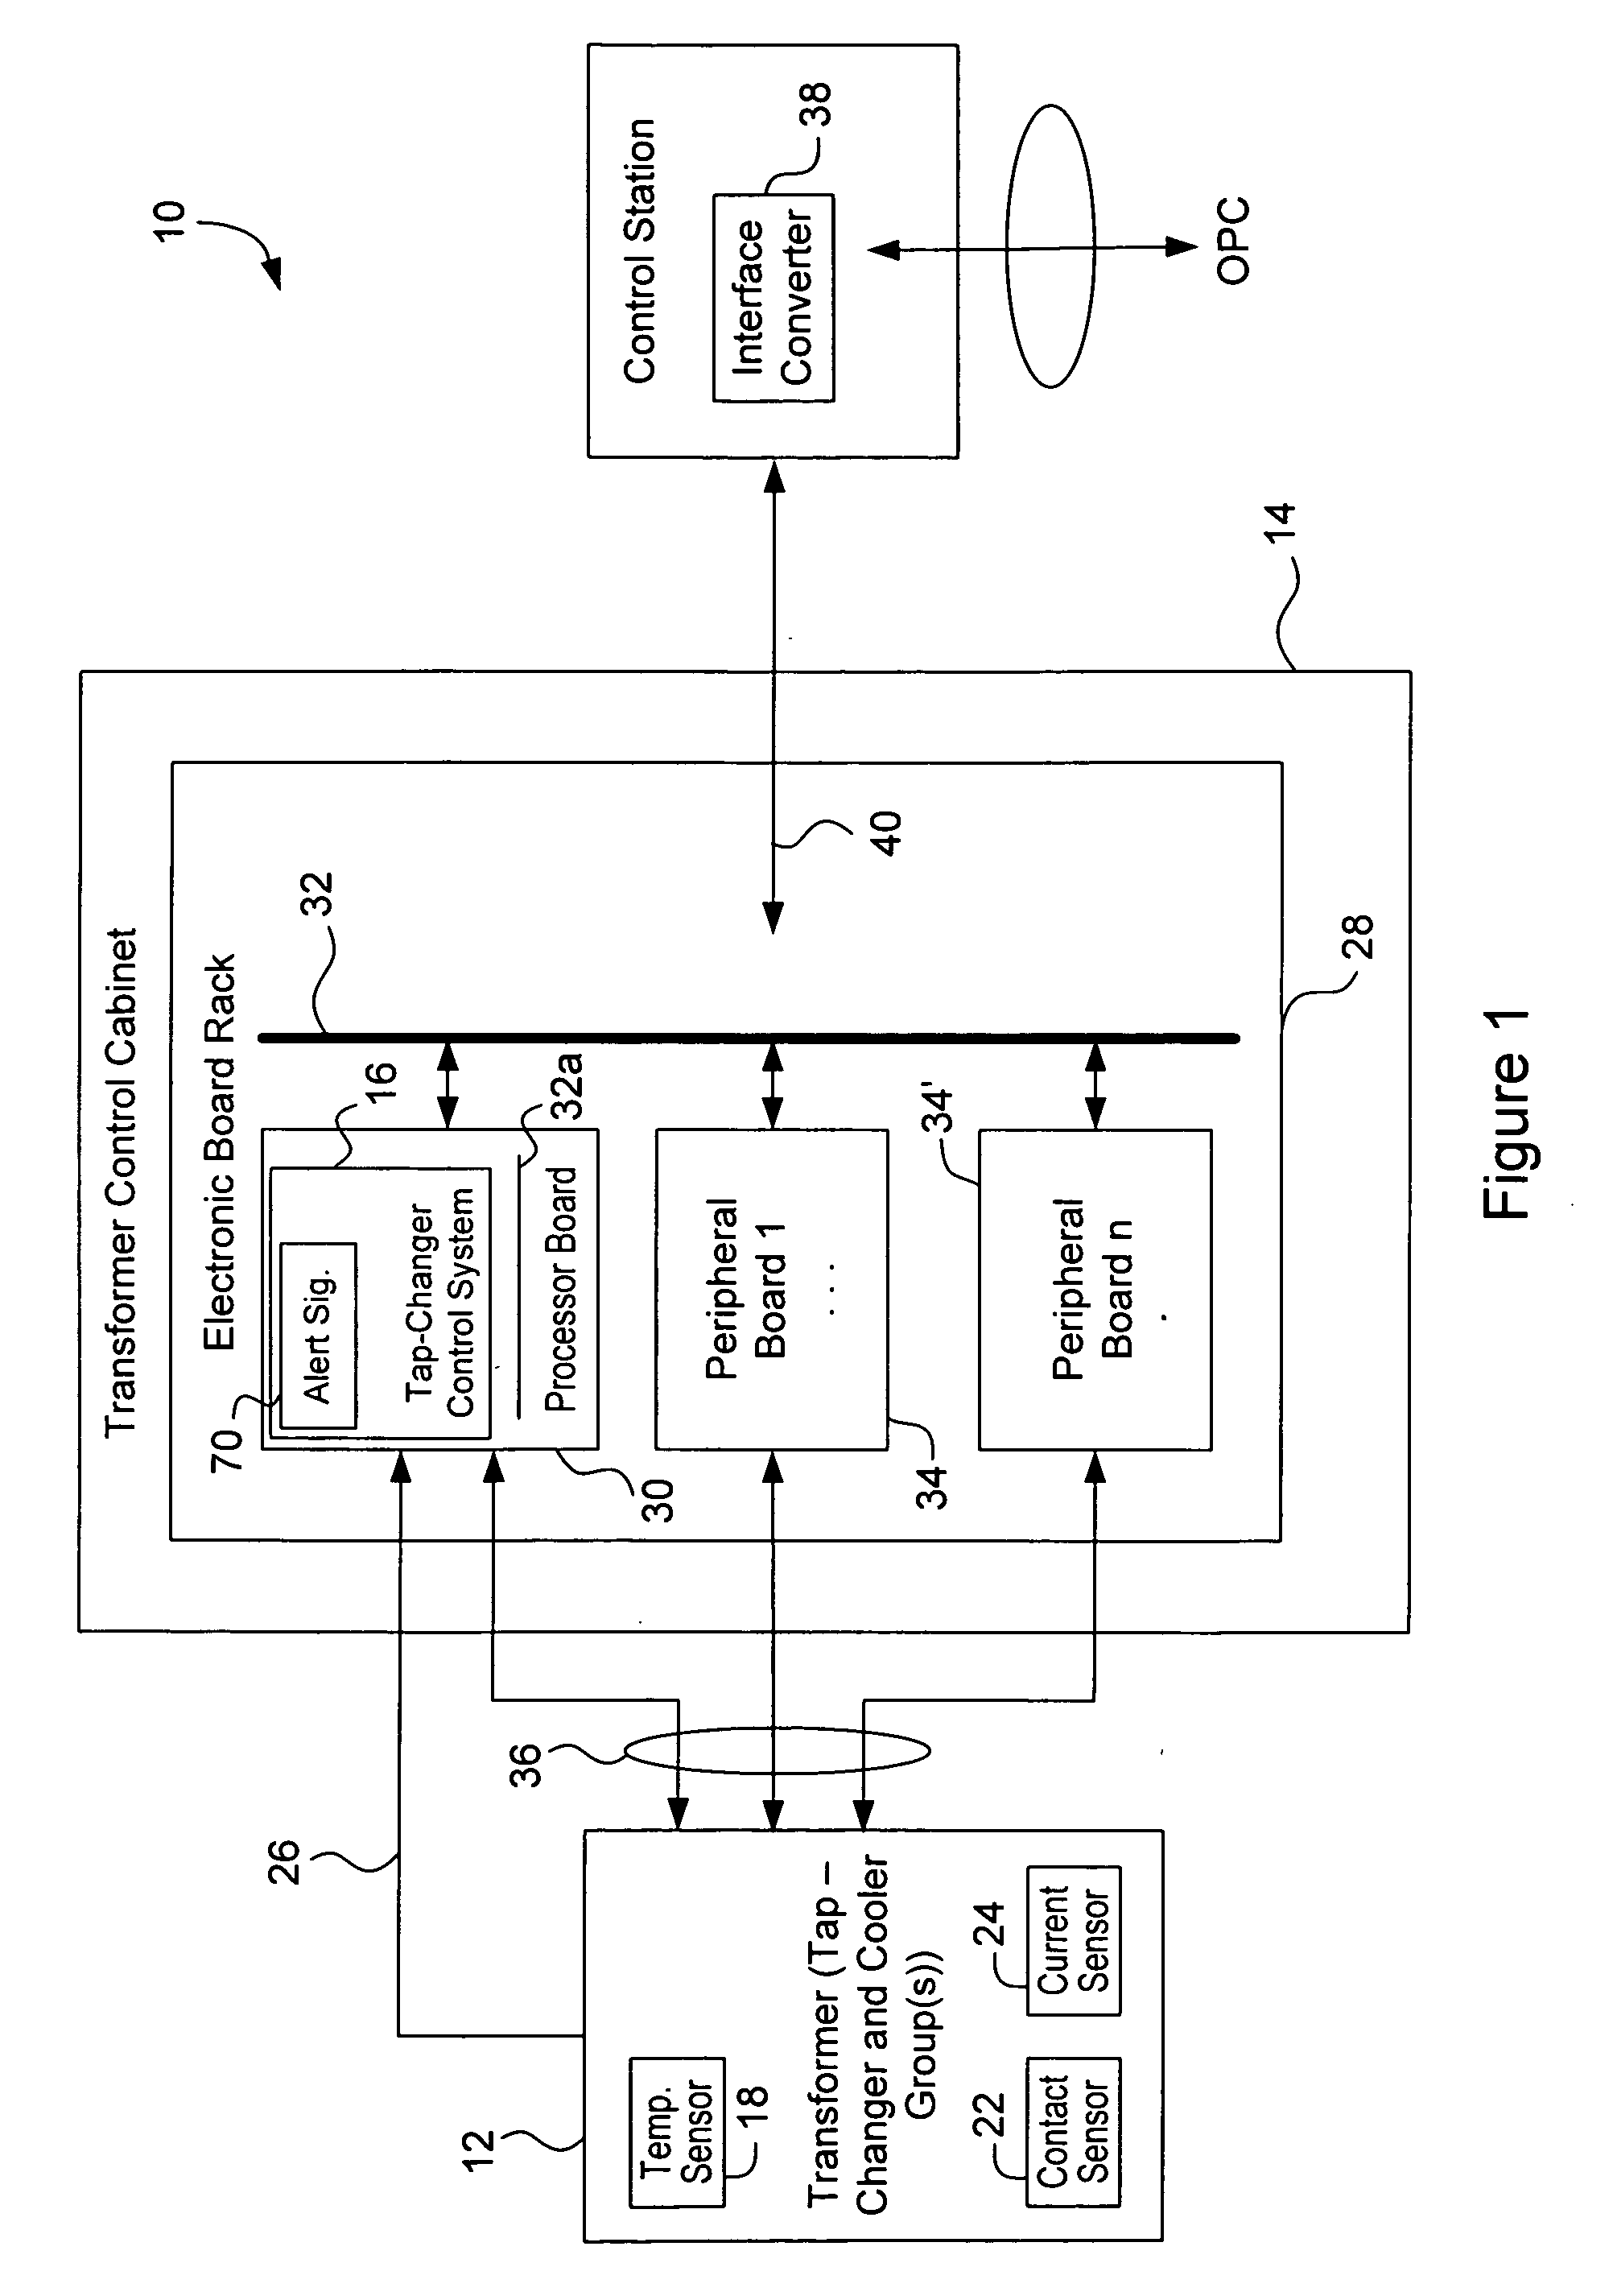 Control system for a transformer or reactor